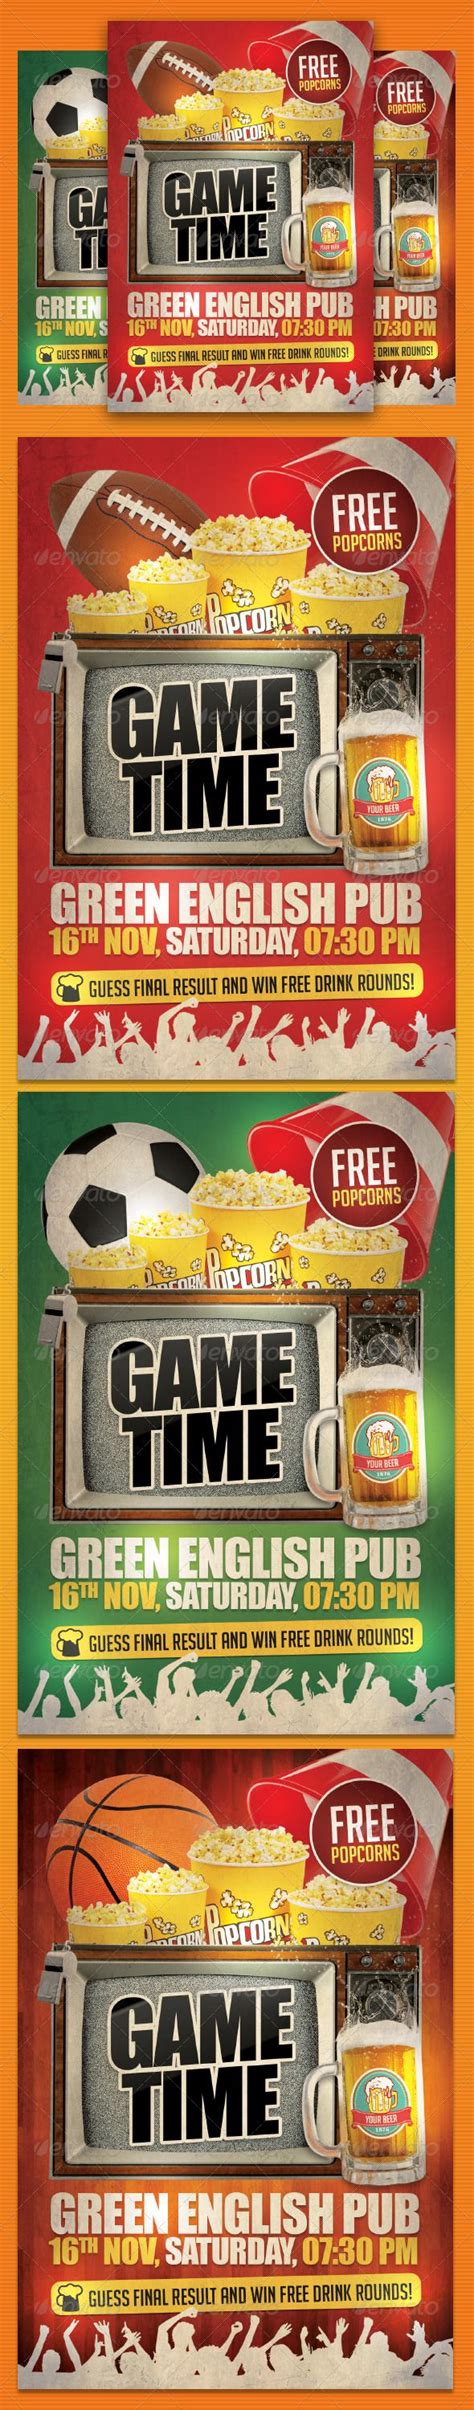 Game day font font 2.85/5. Game Day Party Flyer Template #GraphicRiver Game Time Party Flyer Template is ideal choice if ...